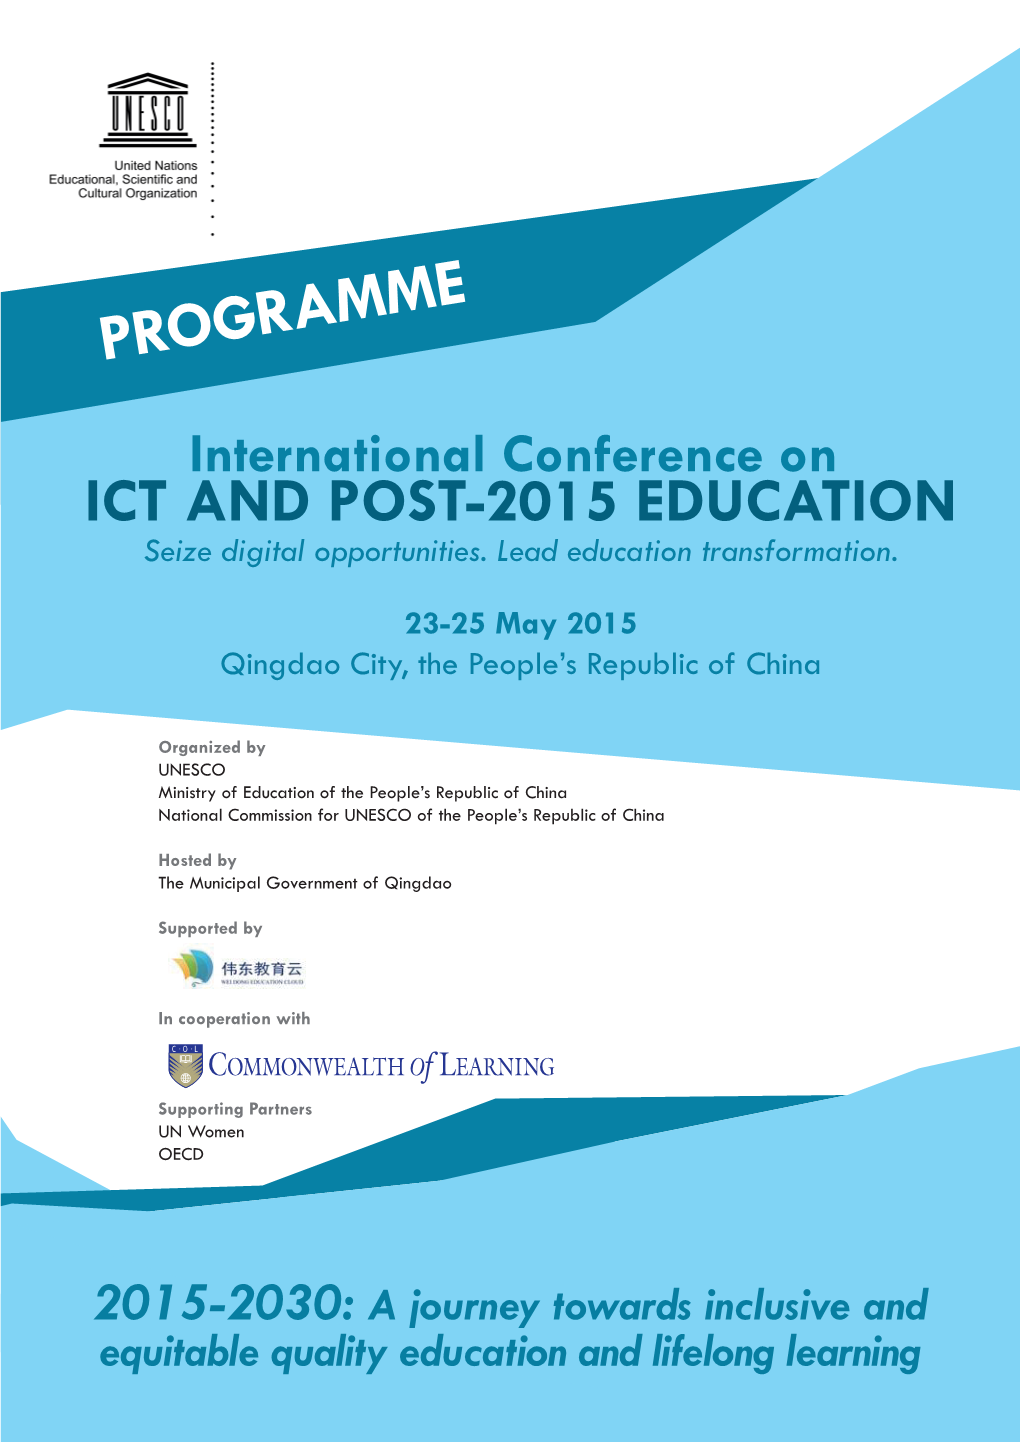 PROGRAMME International Conference on ICT and POST-2015 EDUCATION Seize Digital Opportunities